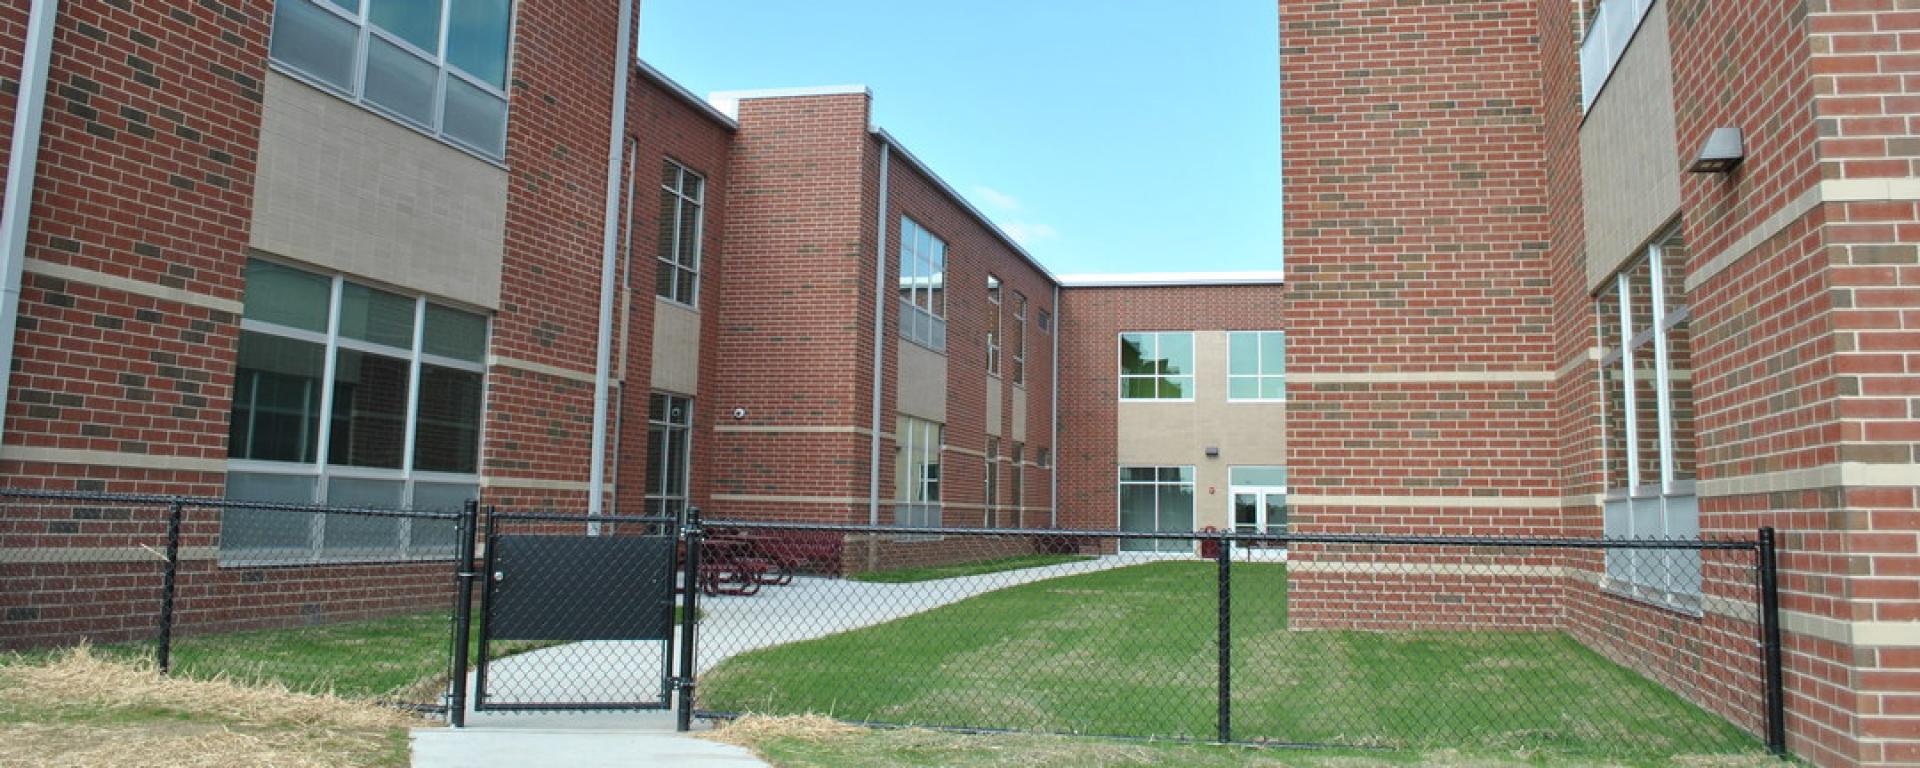 Side view of Fairfield Central Elementary School